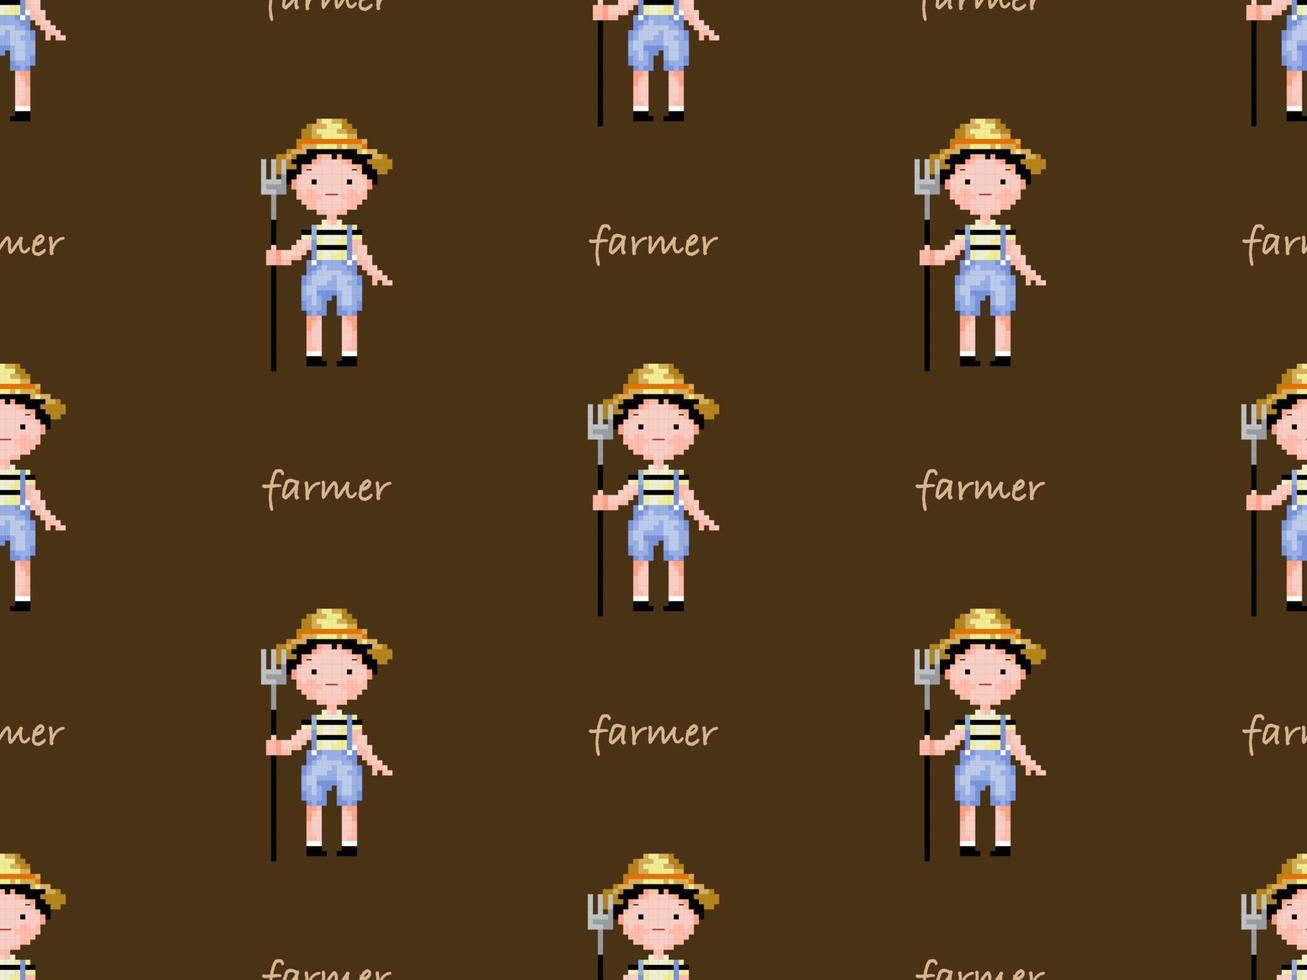 Farmer cartoon character seamless pattern on brown background. Pixel style vector